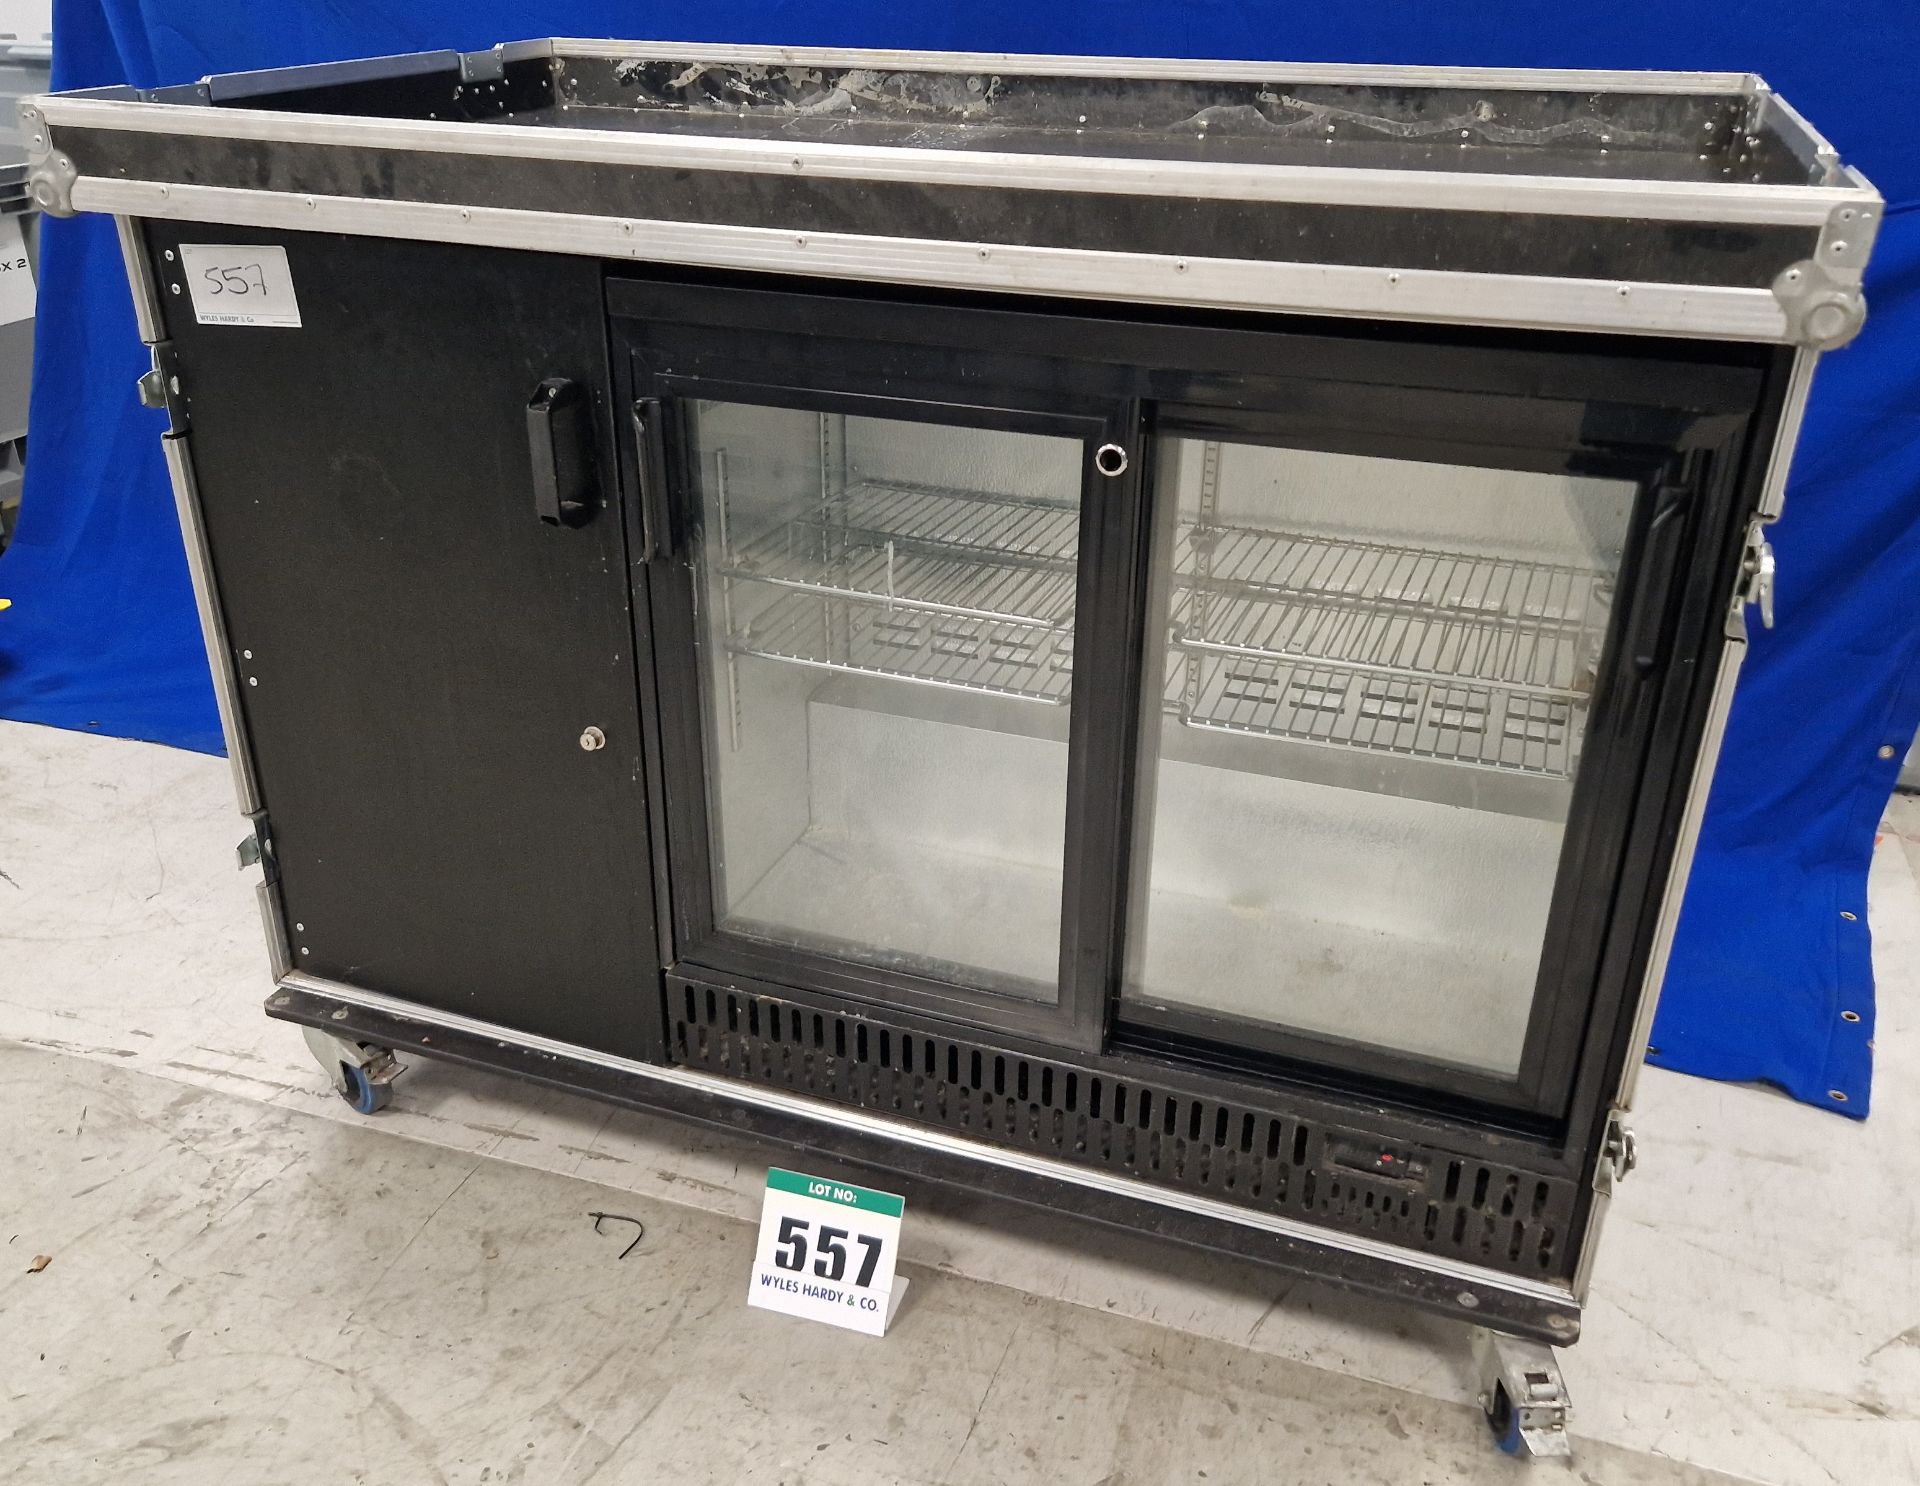 One 1485 x 1035mm x 645mm Castor mounted Flight Case with fitted 2-Door Drinks Chiller and